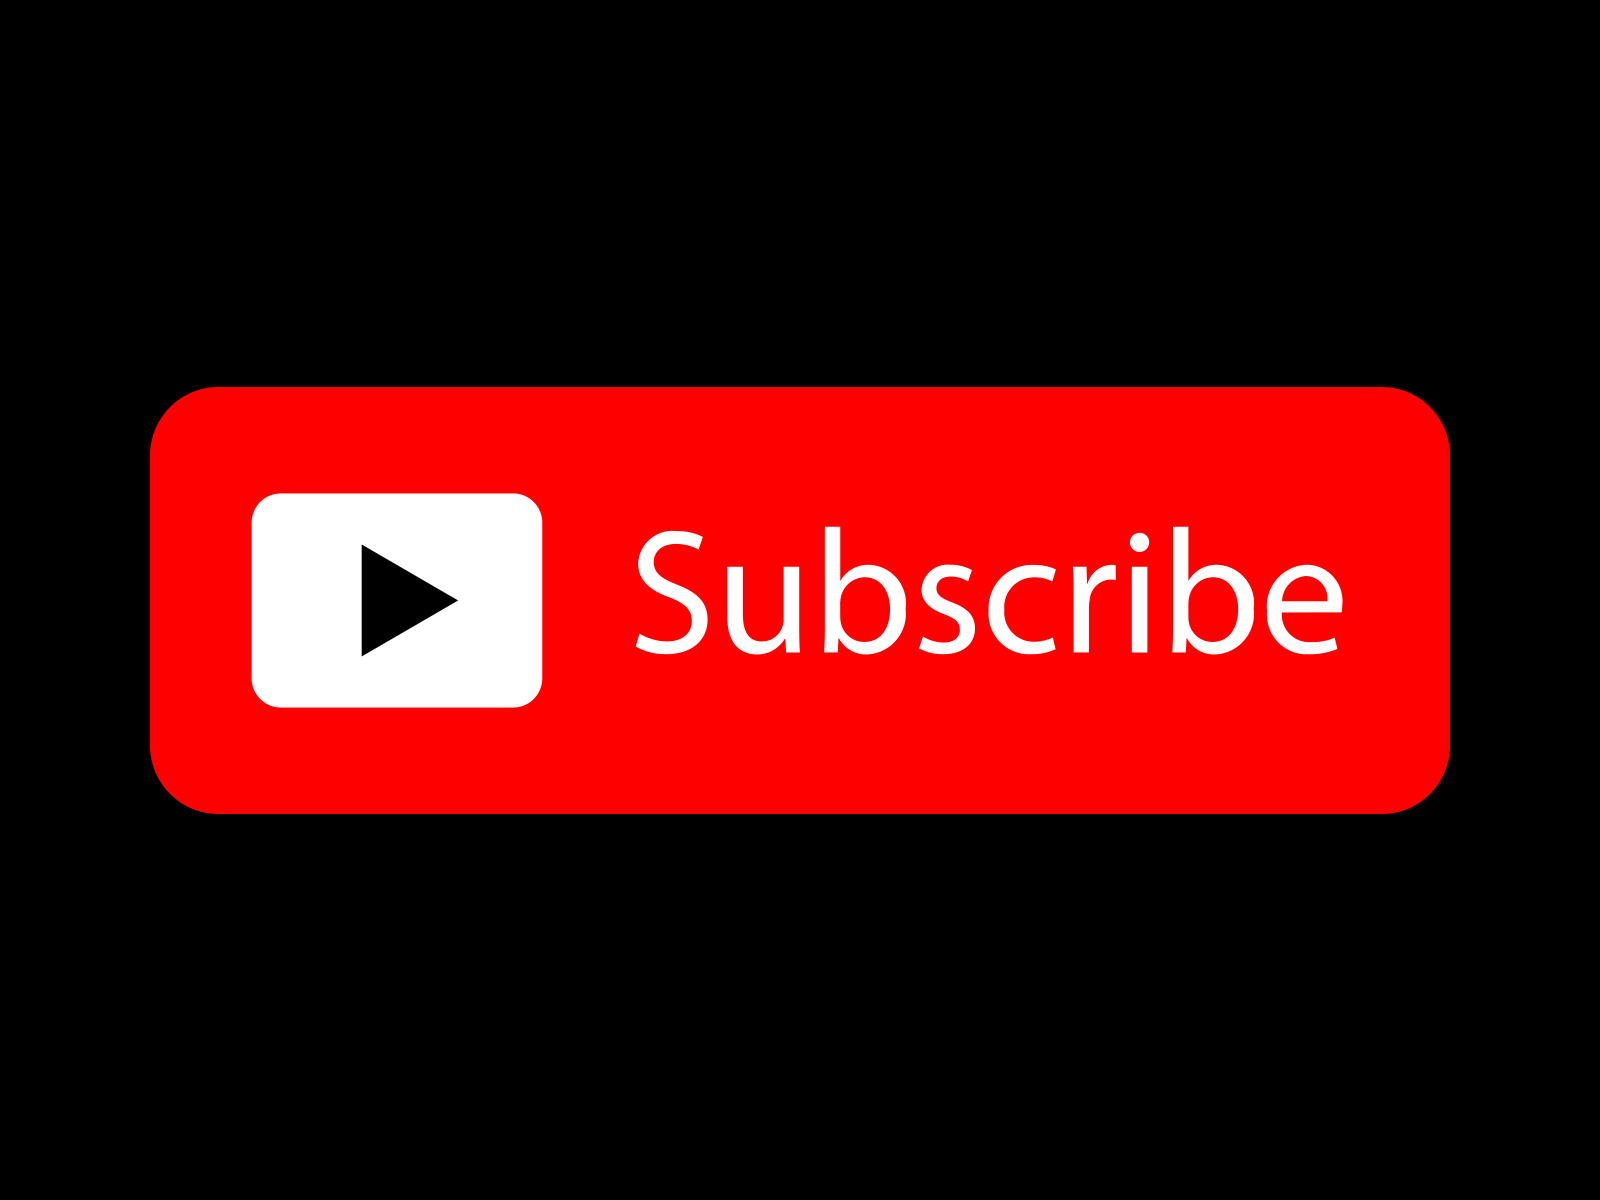 Free Red YouTube Subscribe Button Icon By AlfredoCreates #7